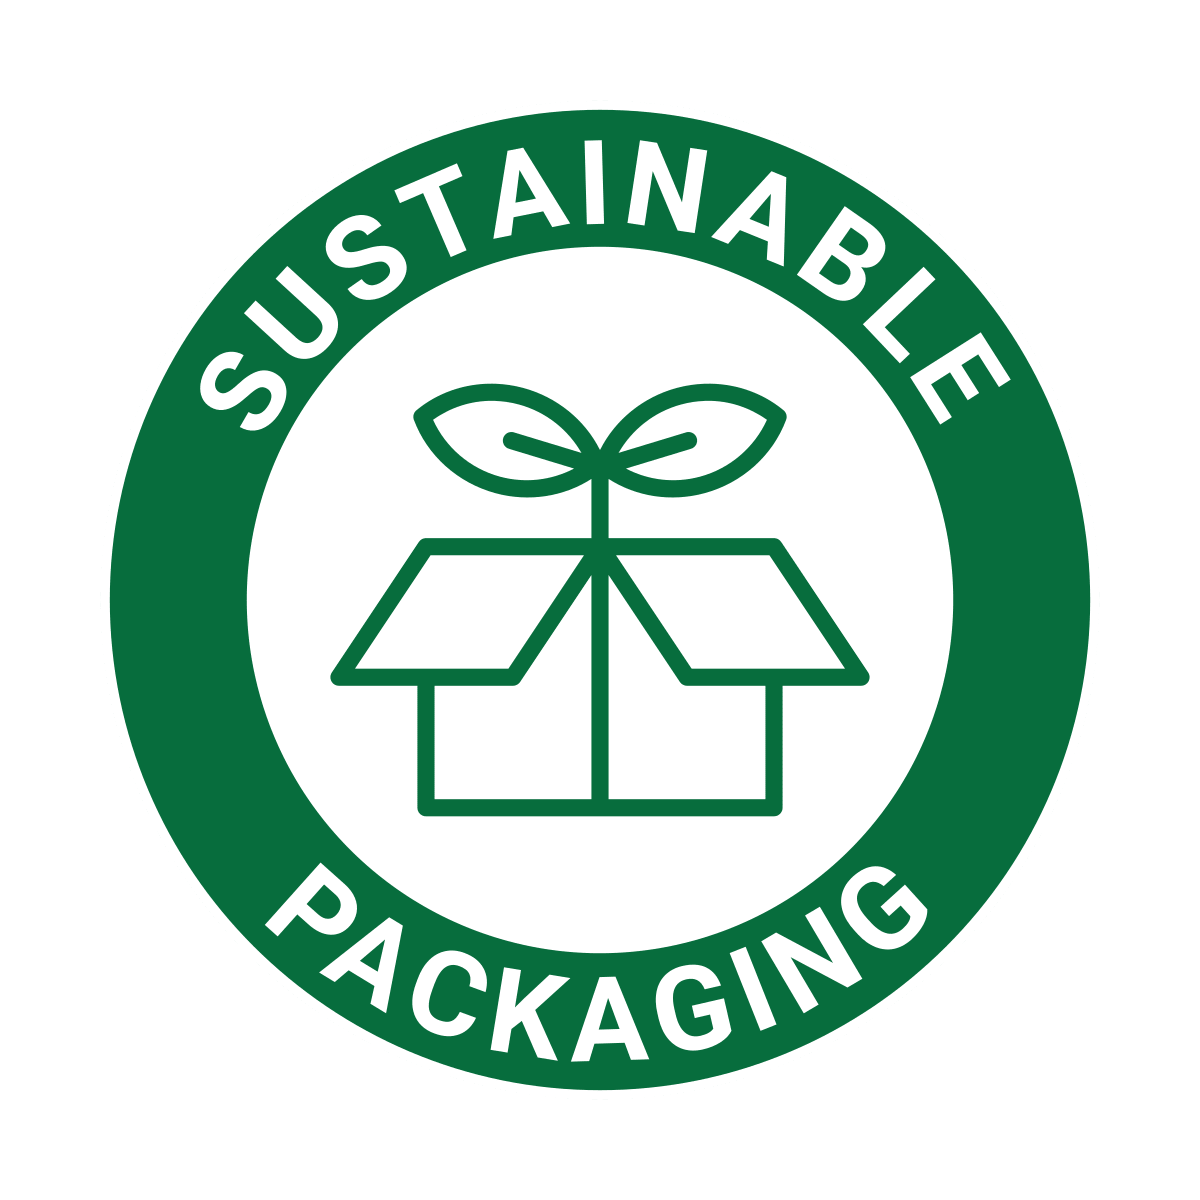 We use and reuse environmentally friendly packaging